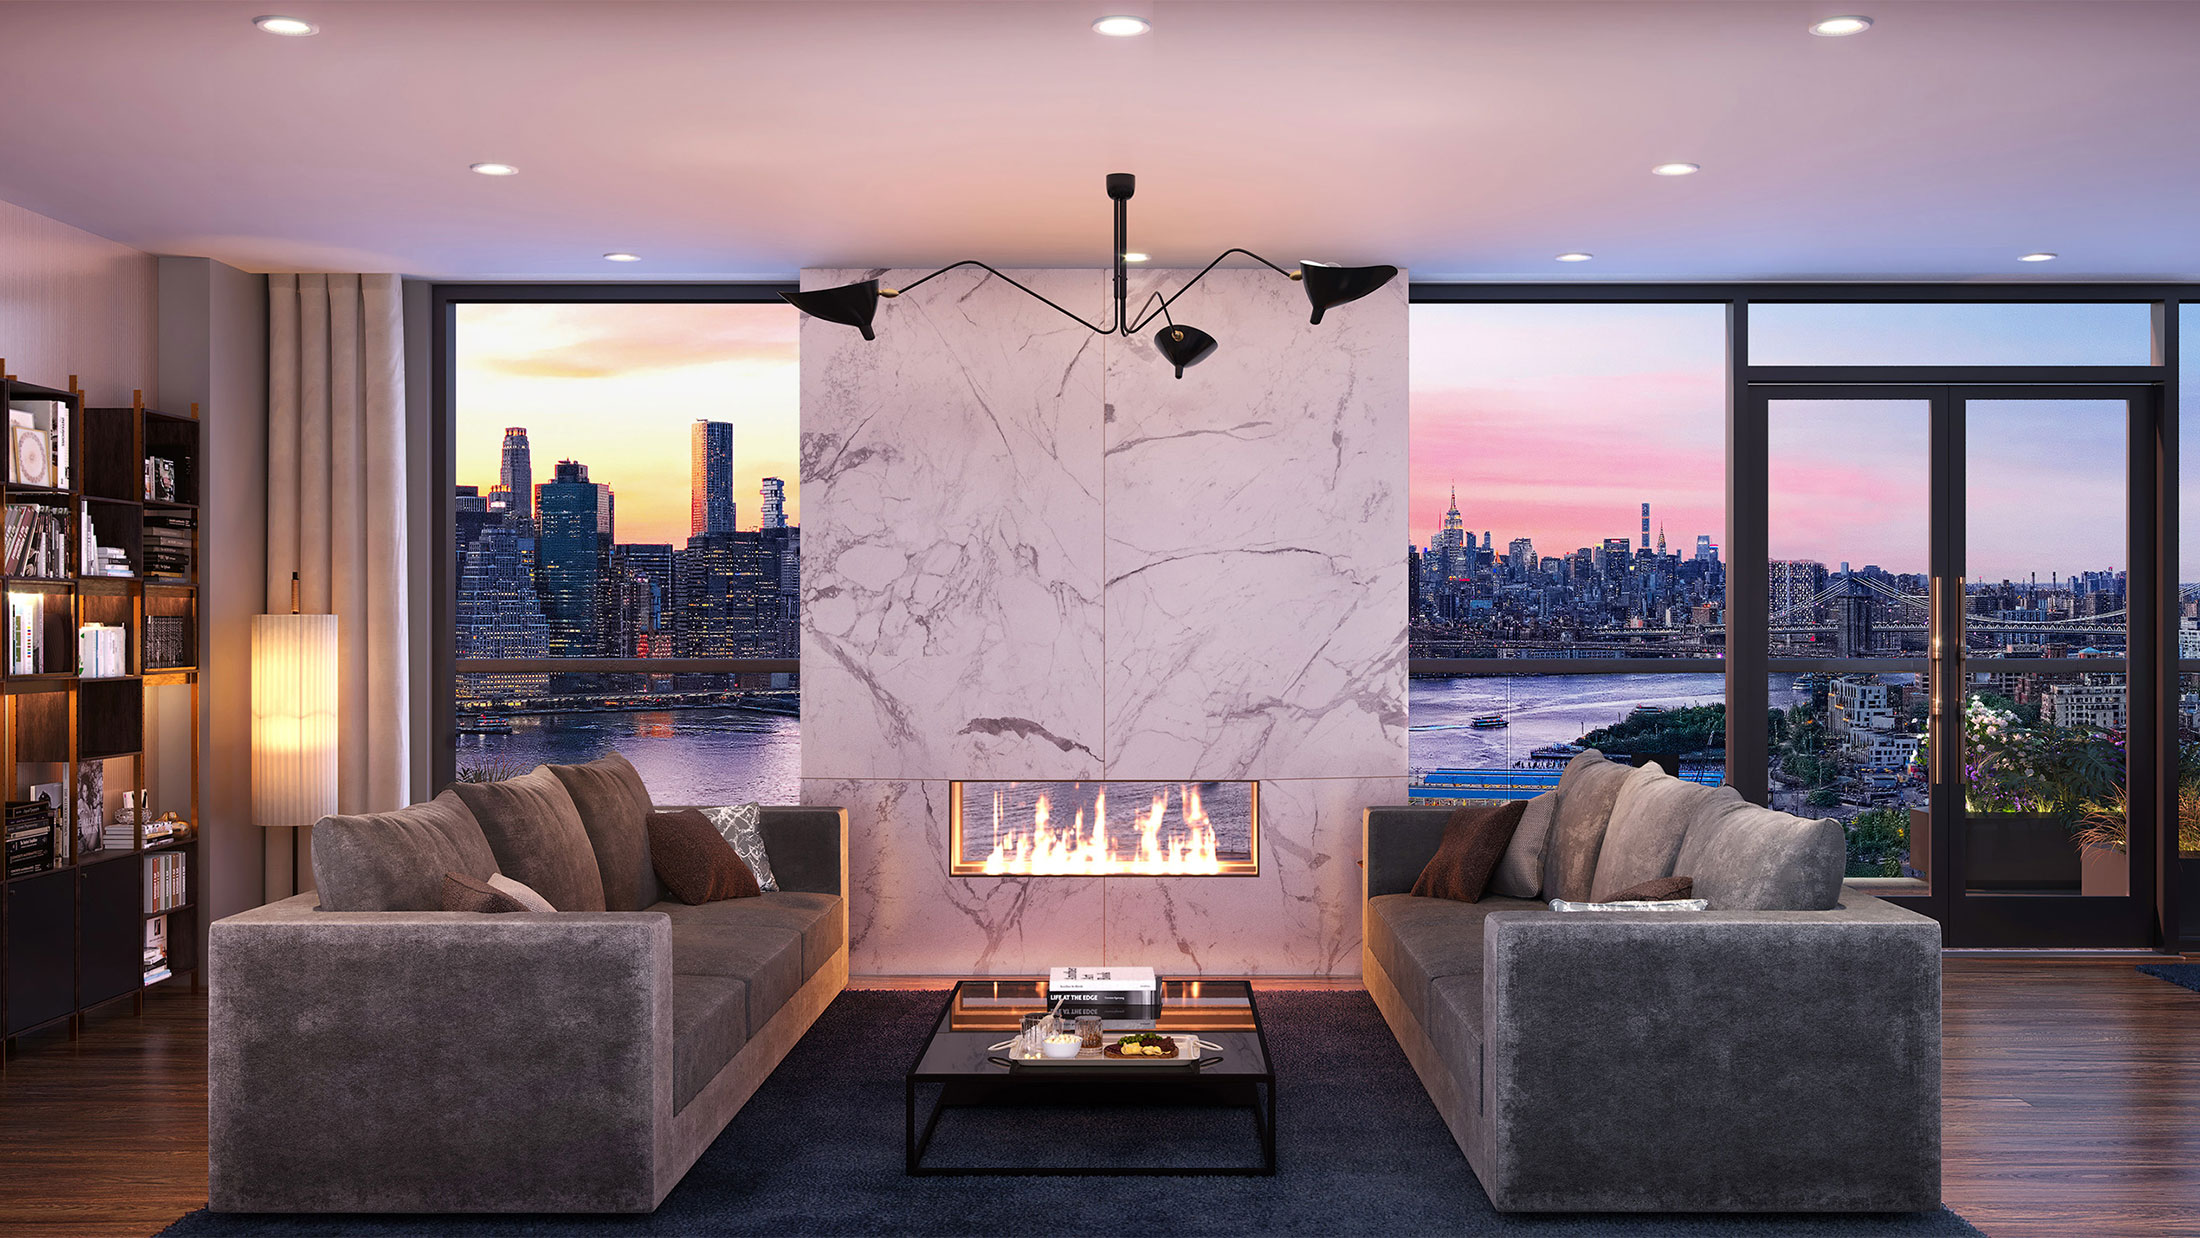 Architectural Rendering of the interior of the The Quay Tower project located in Brooklyn Heights, New York